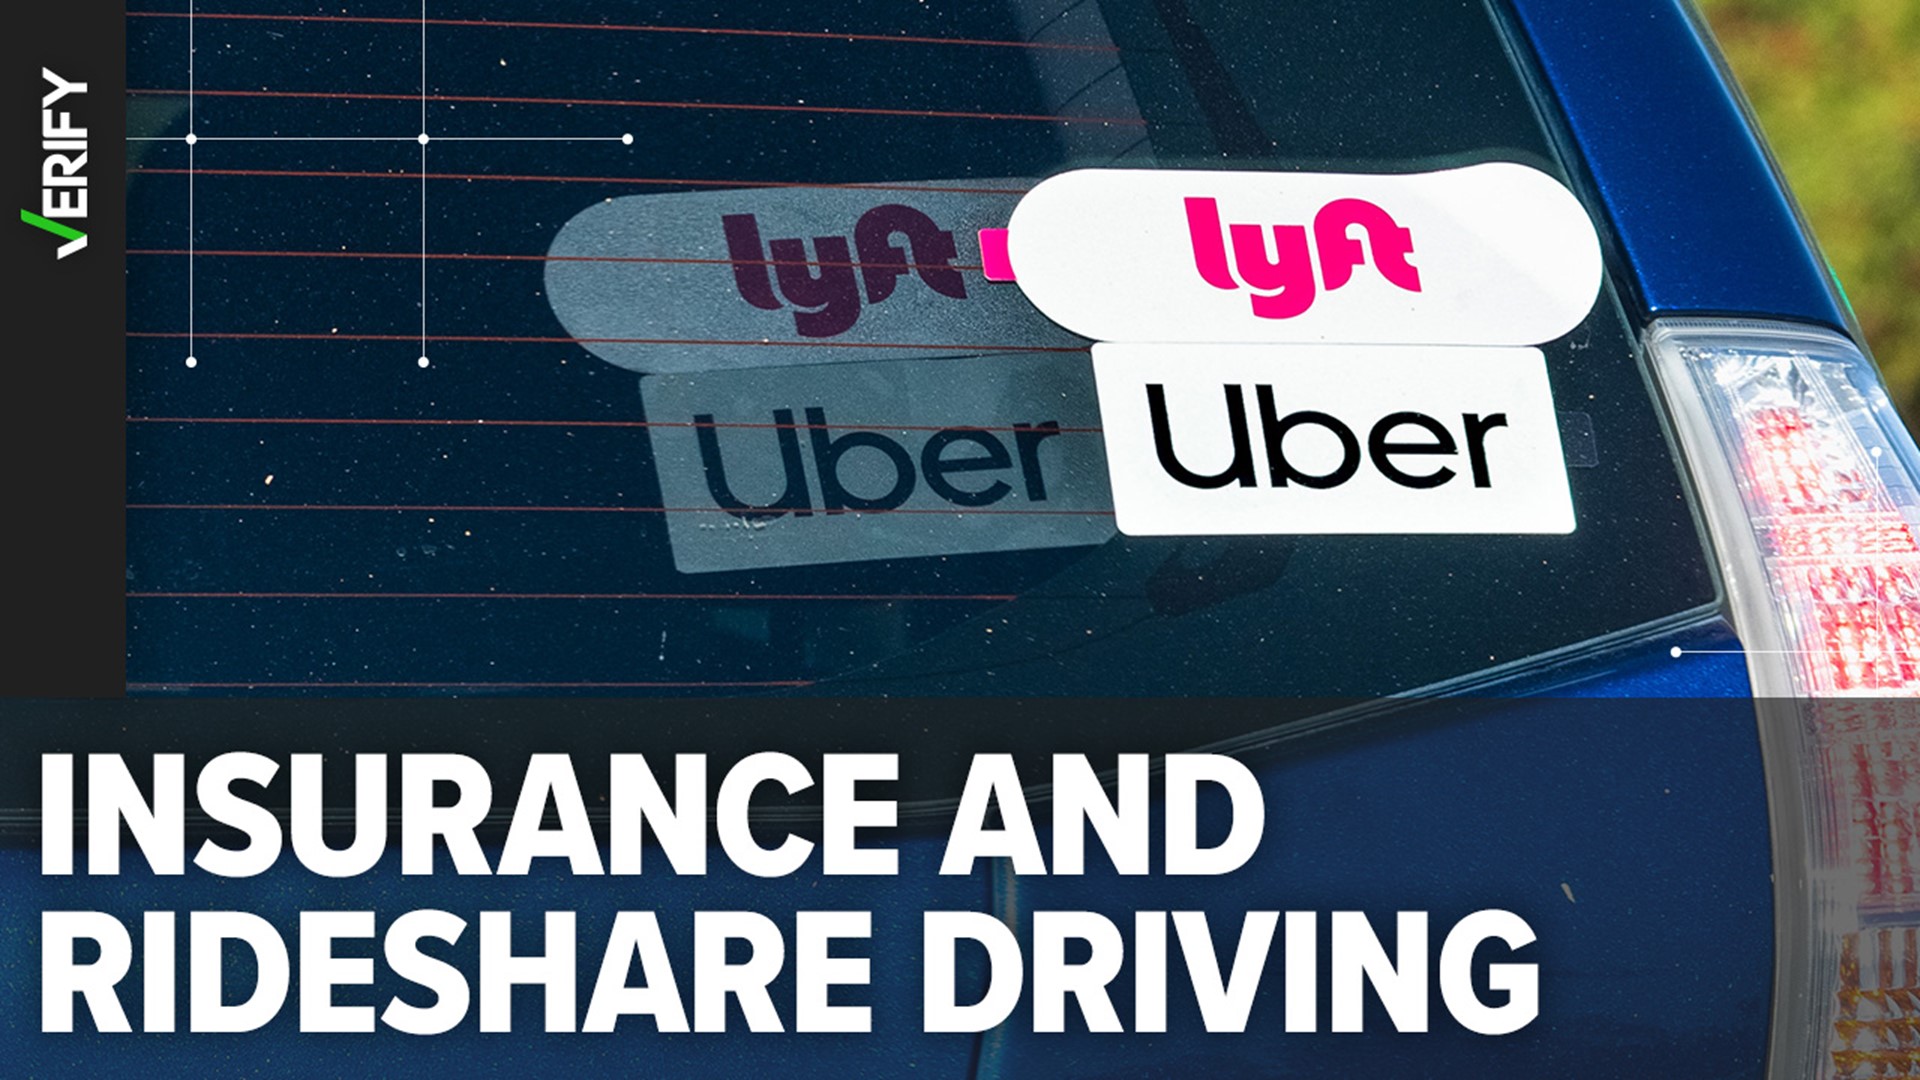 Uber and Lyft drivers could have to pay out of pocket if they get in an accident while the app is open but before starting a ride.